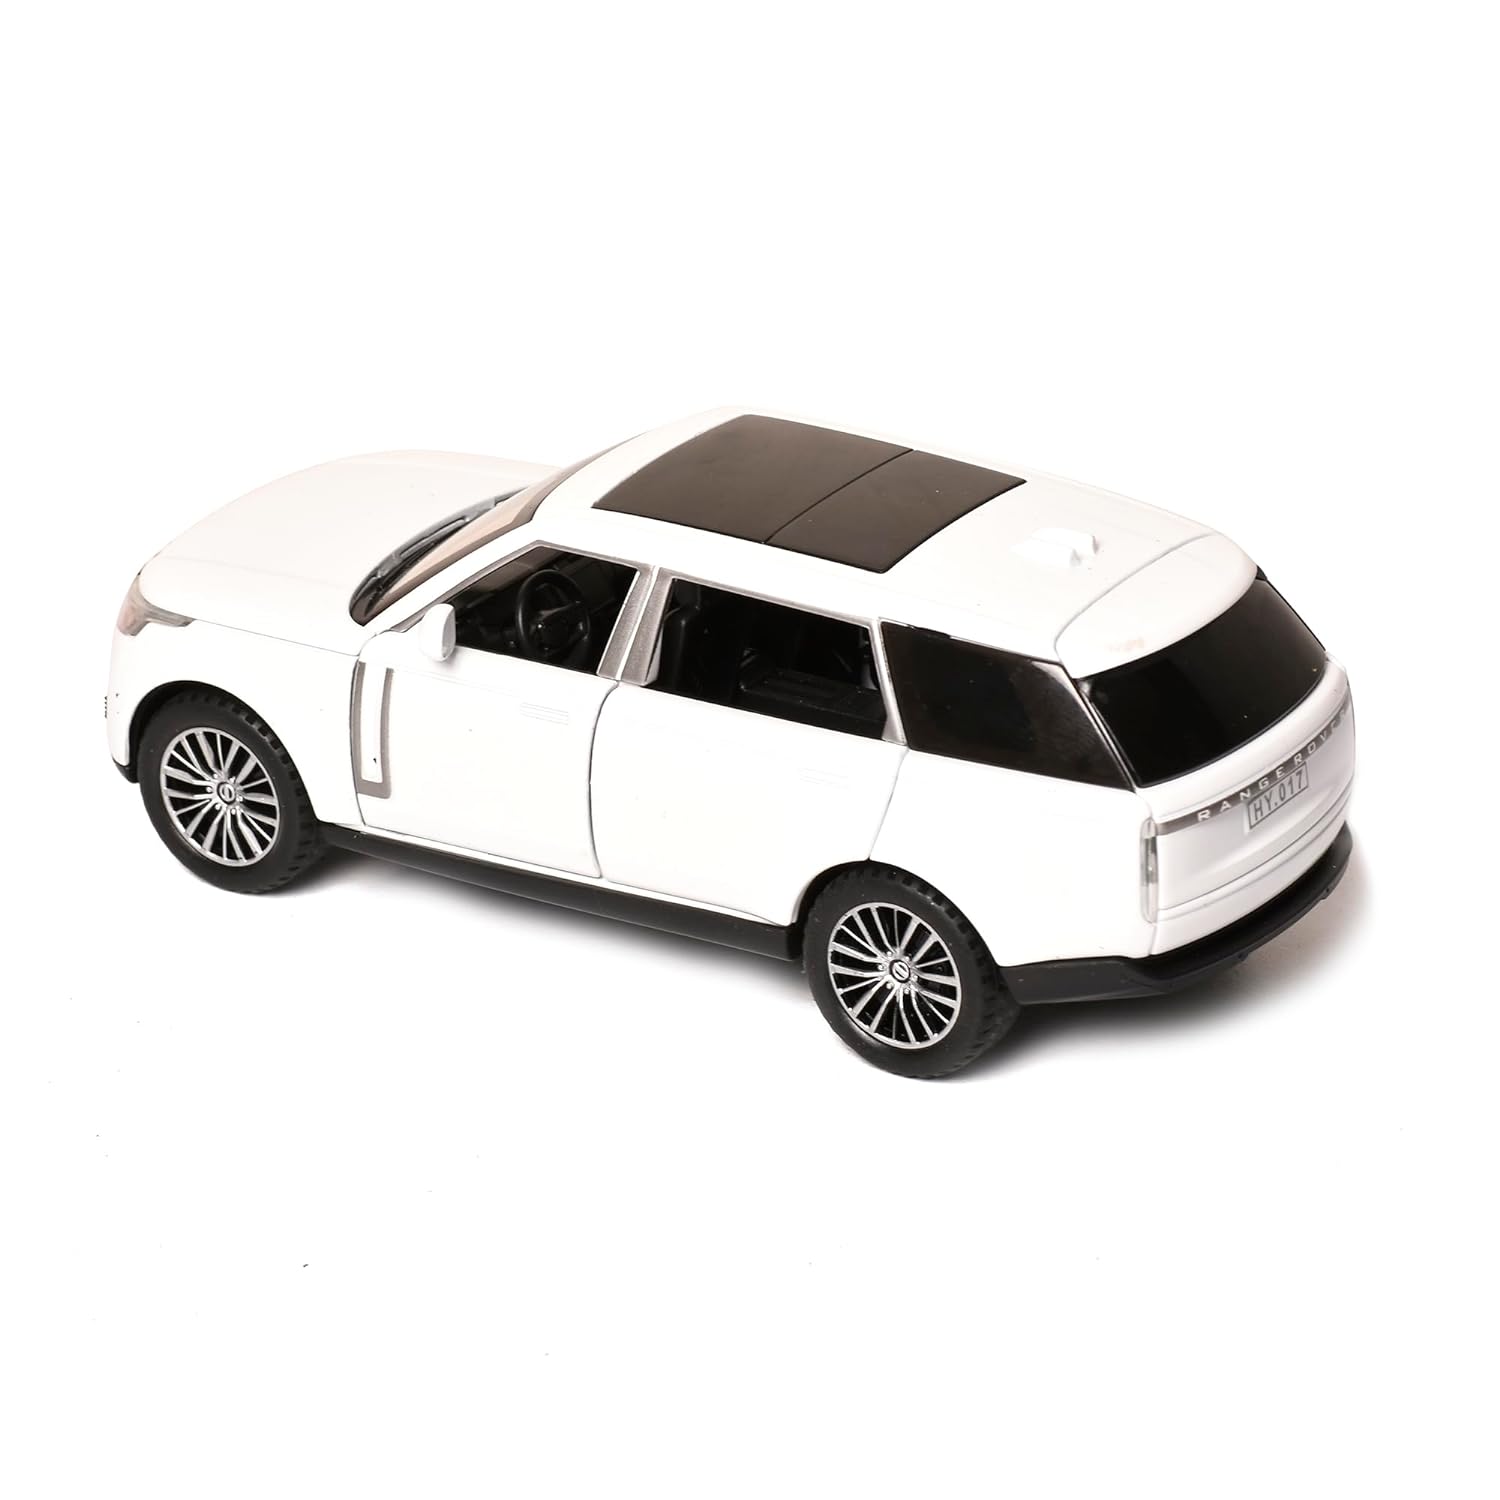 Braintastic Model Diecast Car Toy Vehicle Pull Back Friction Car with Openable Doors Light & Music Toys for Kids Age 3+ Years (AK Metal Series Range Rover White)